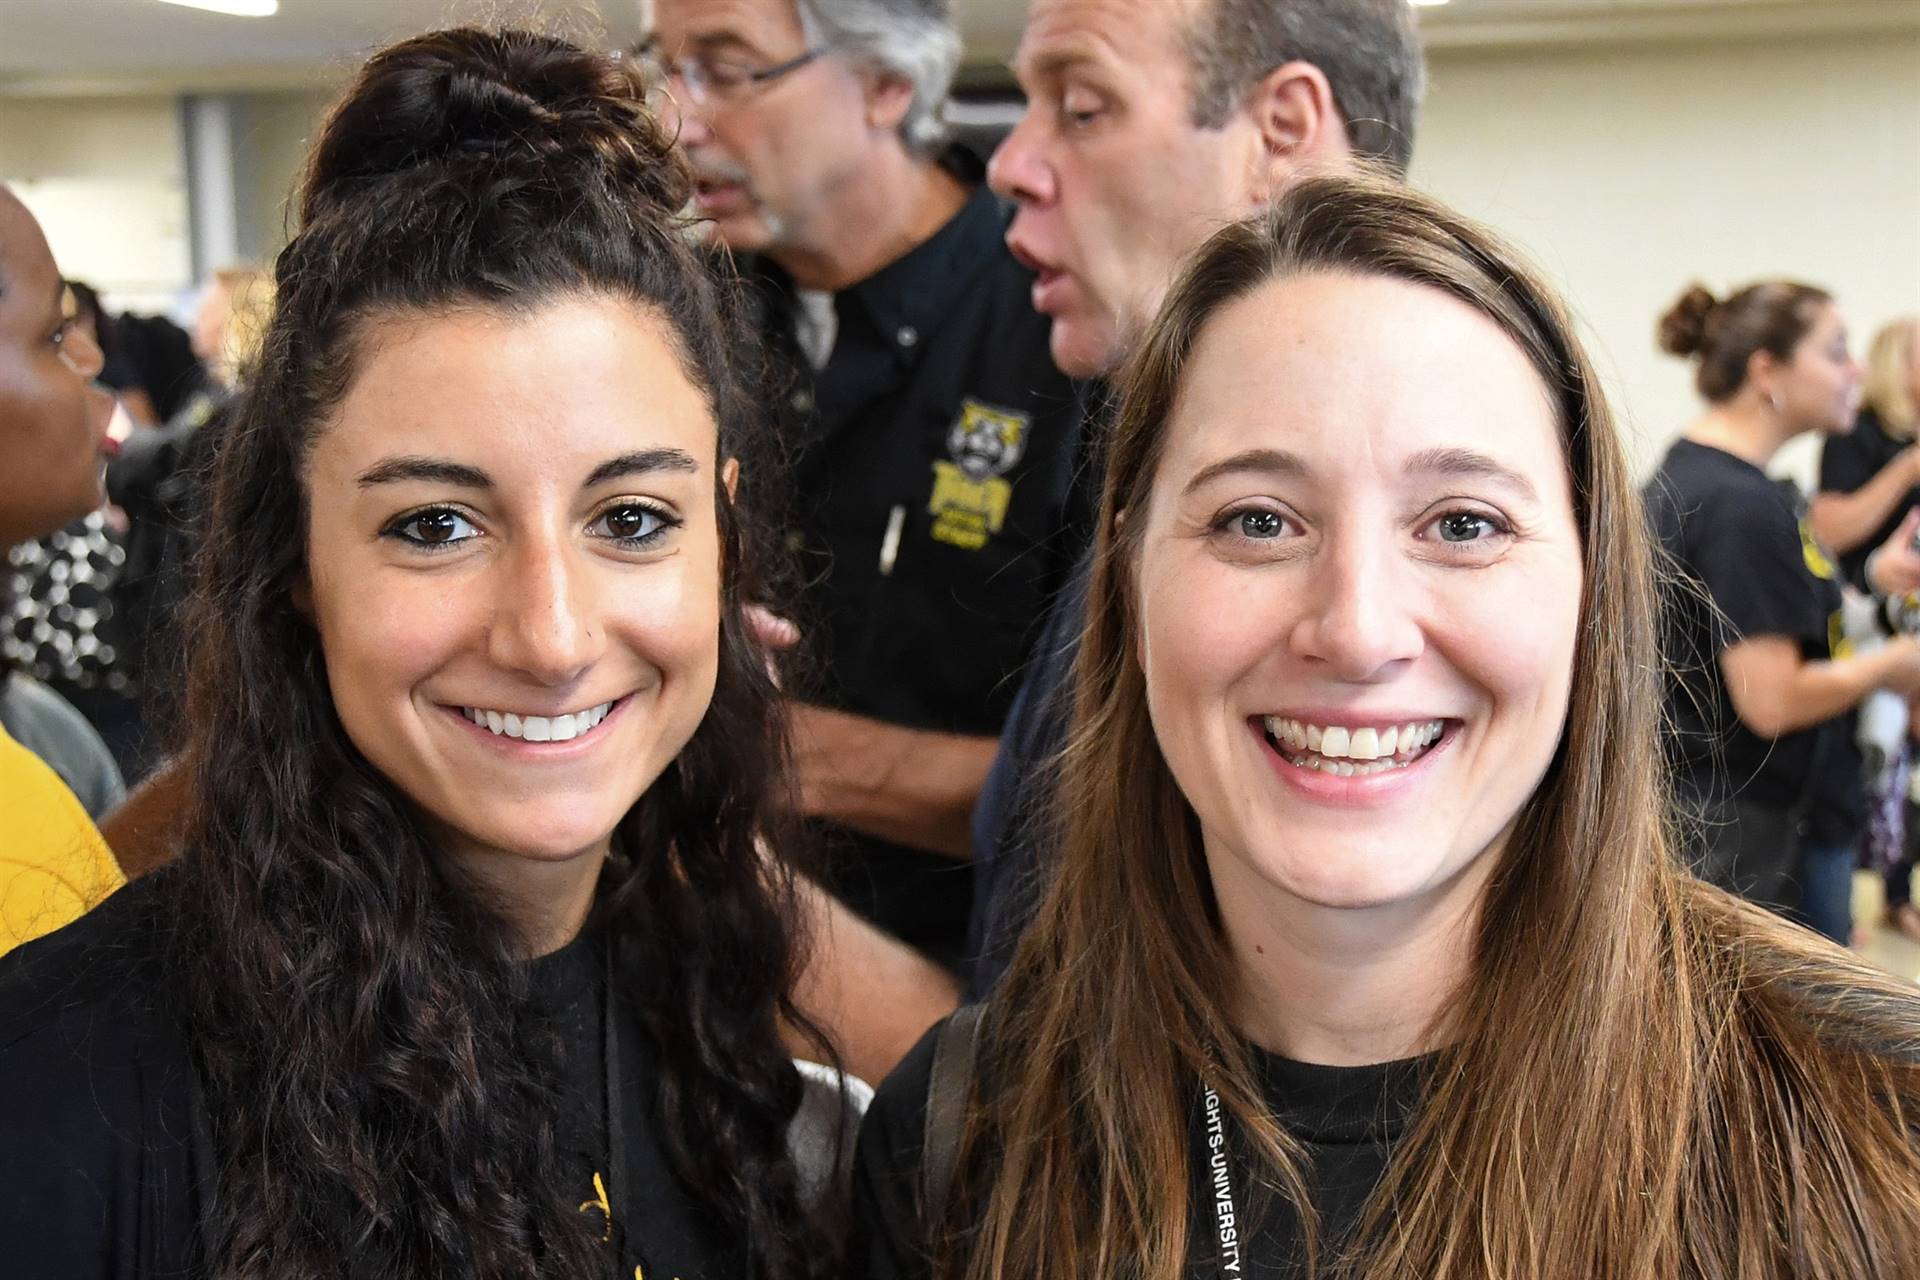 Two staff members smiling